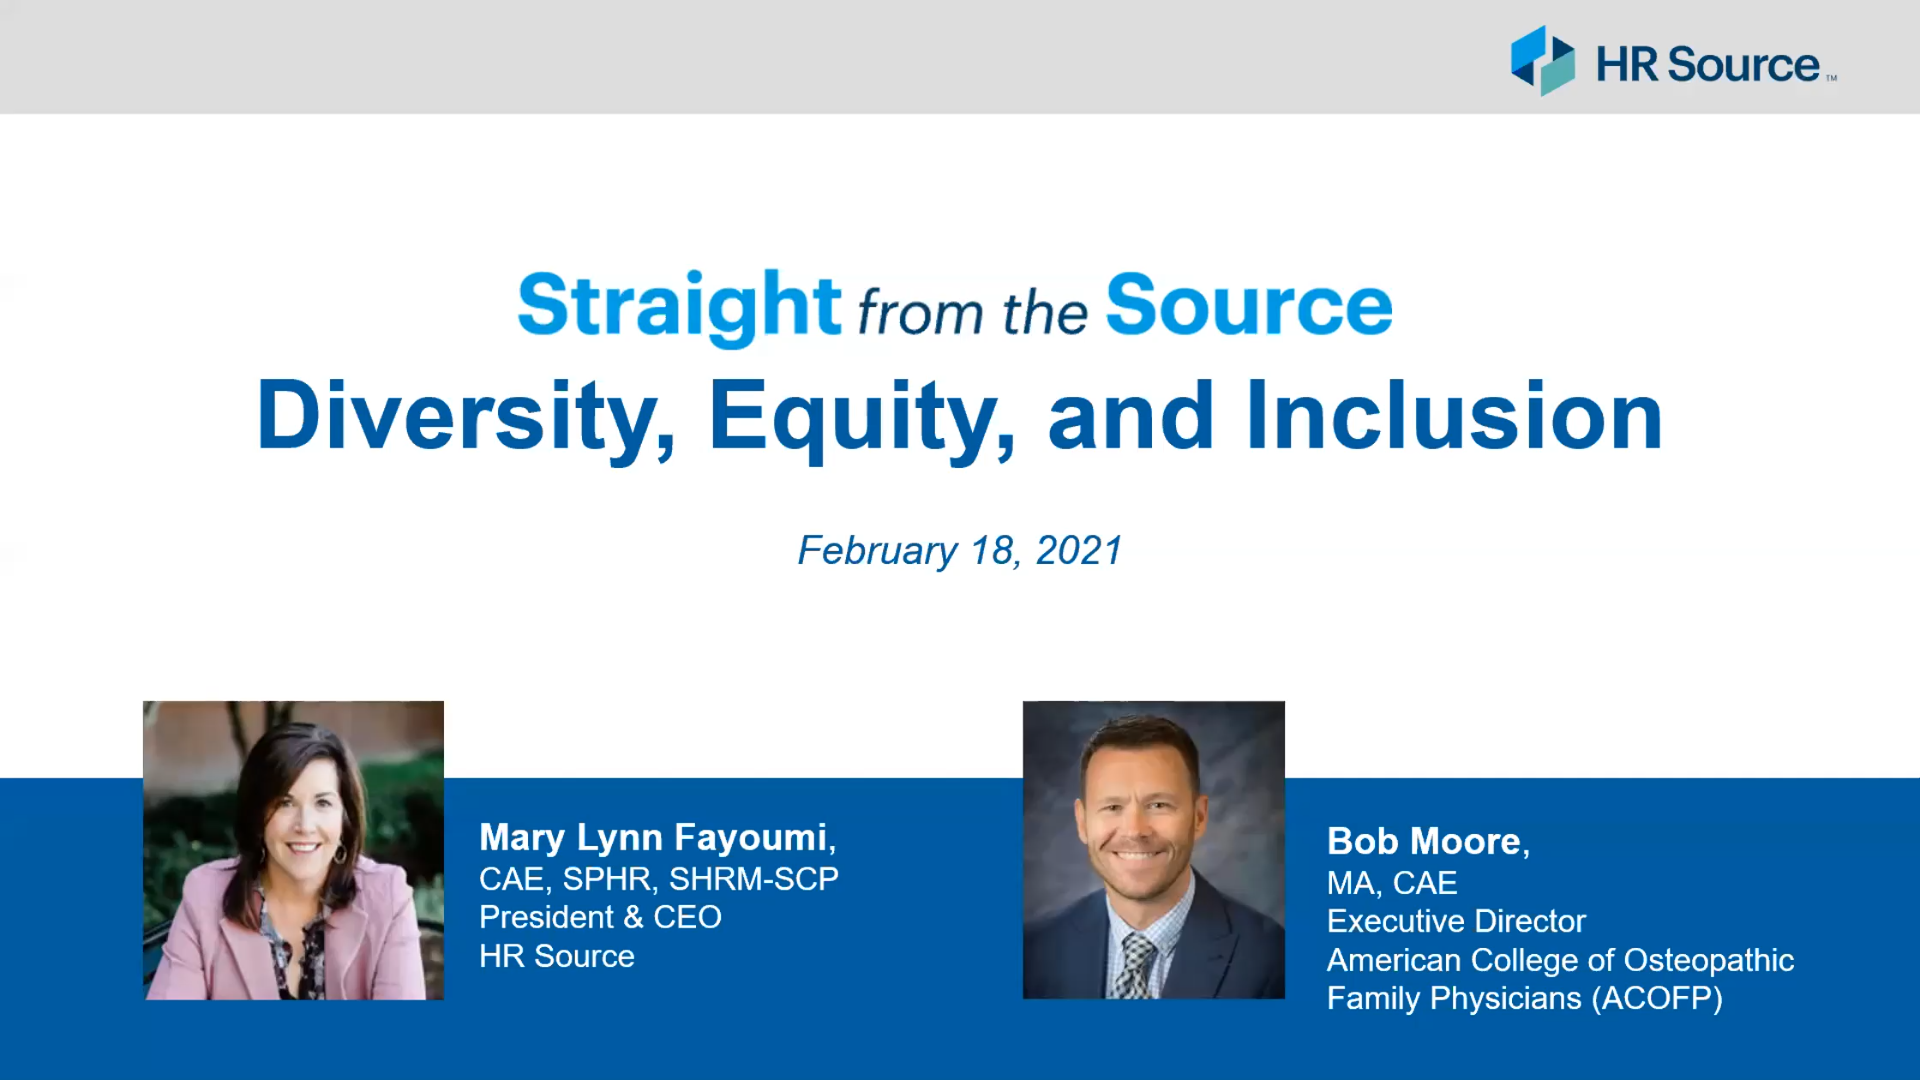 Straight from the Source: Diversity, Equity, and Inclusion